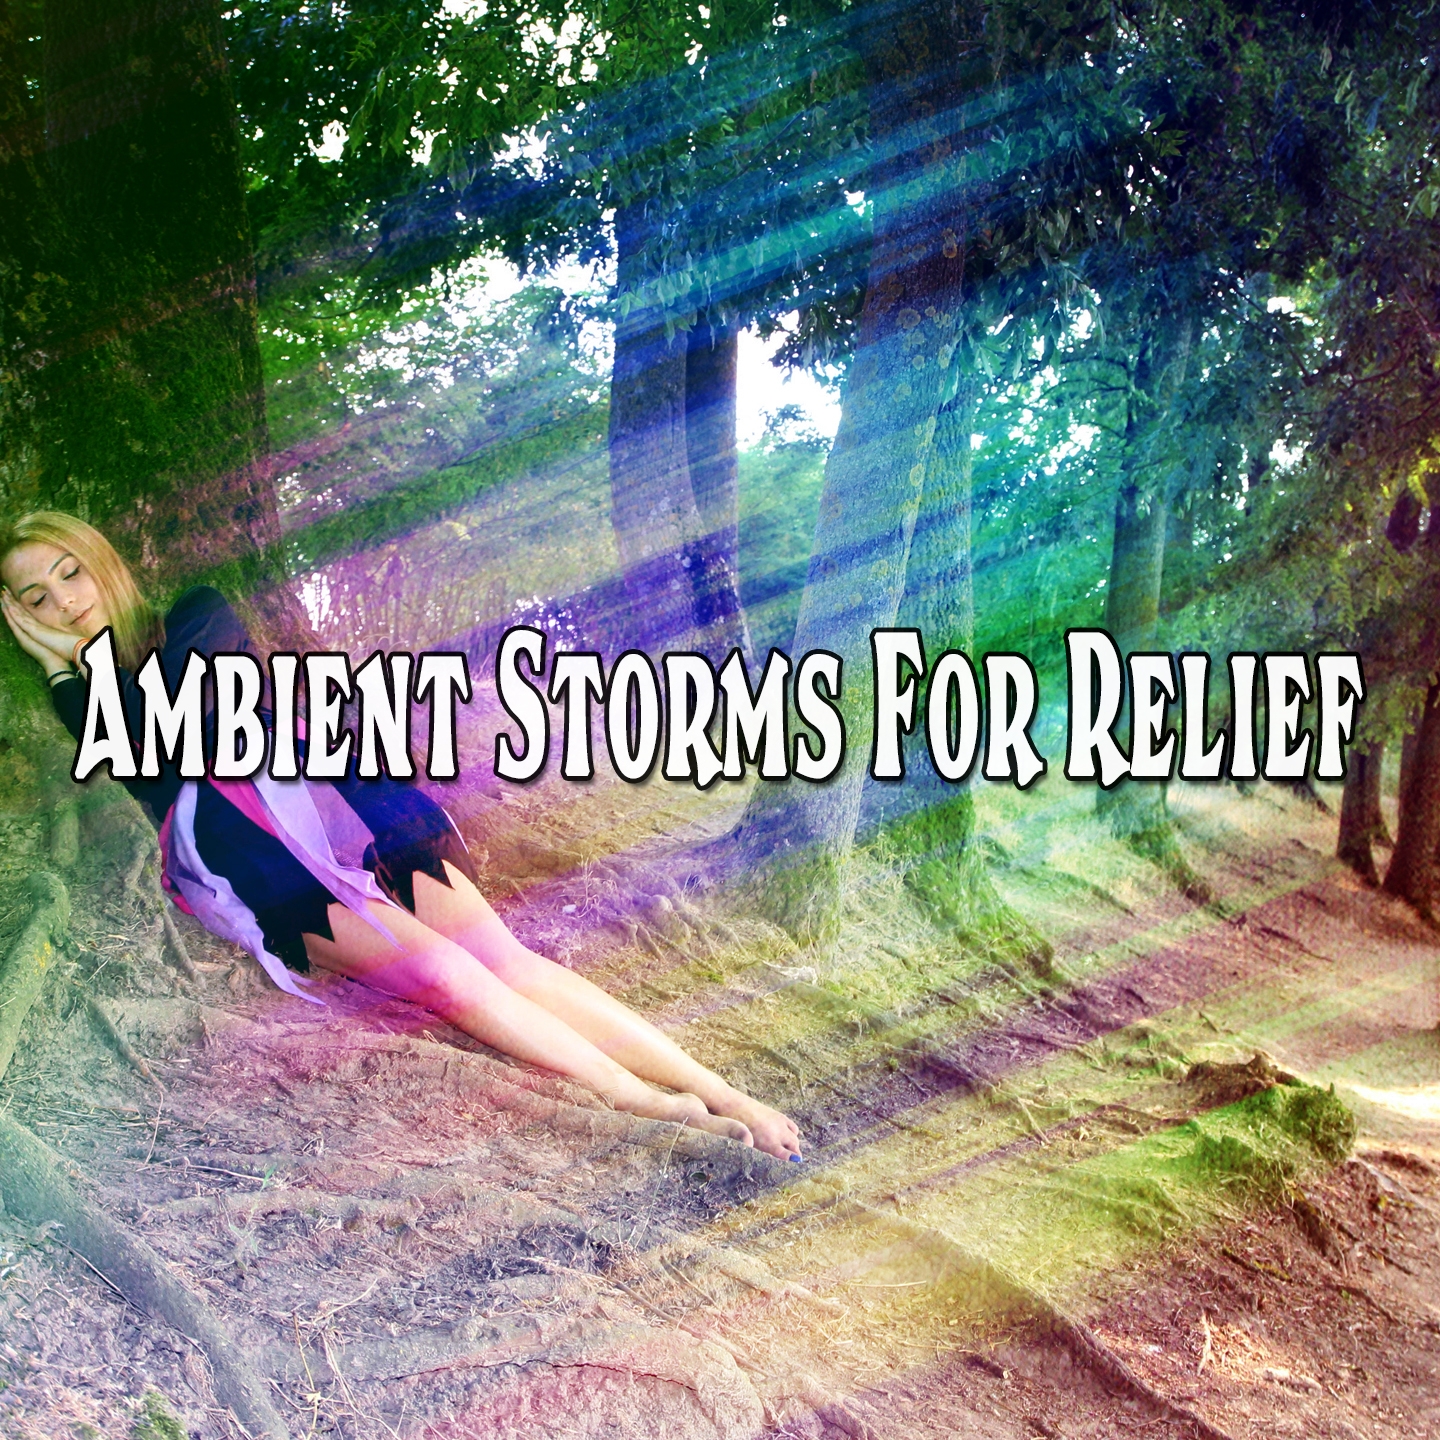 Ambient Storms For Relief